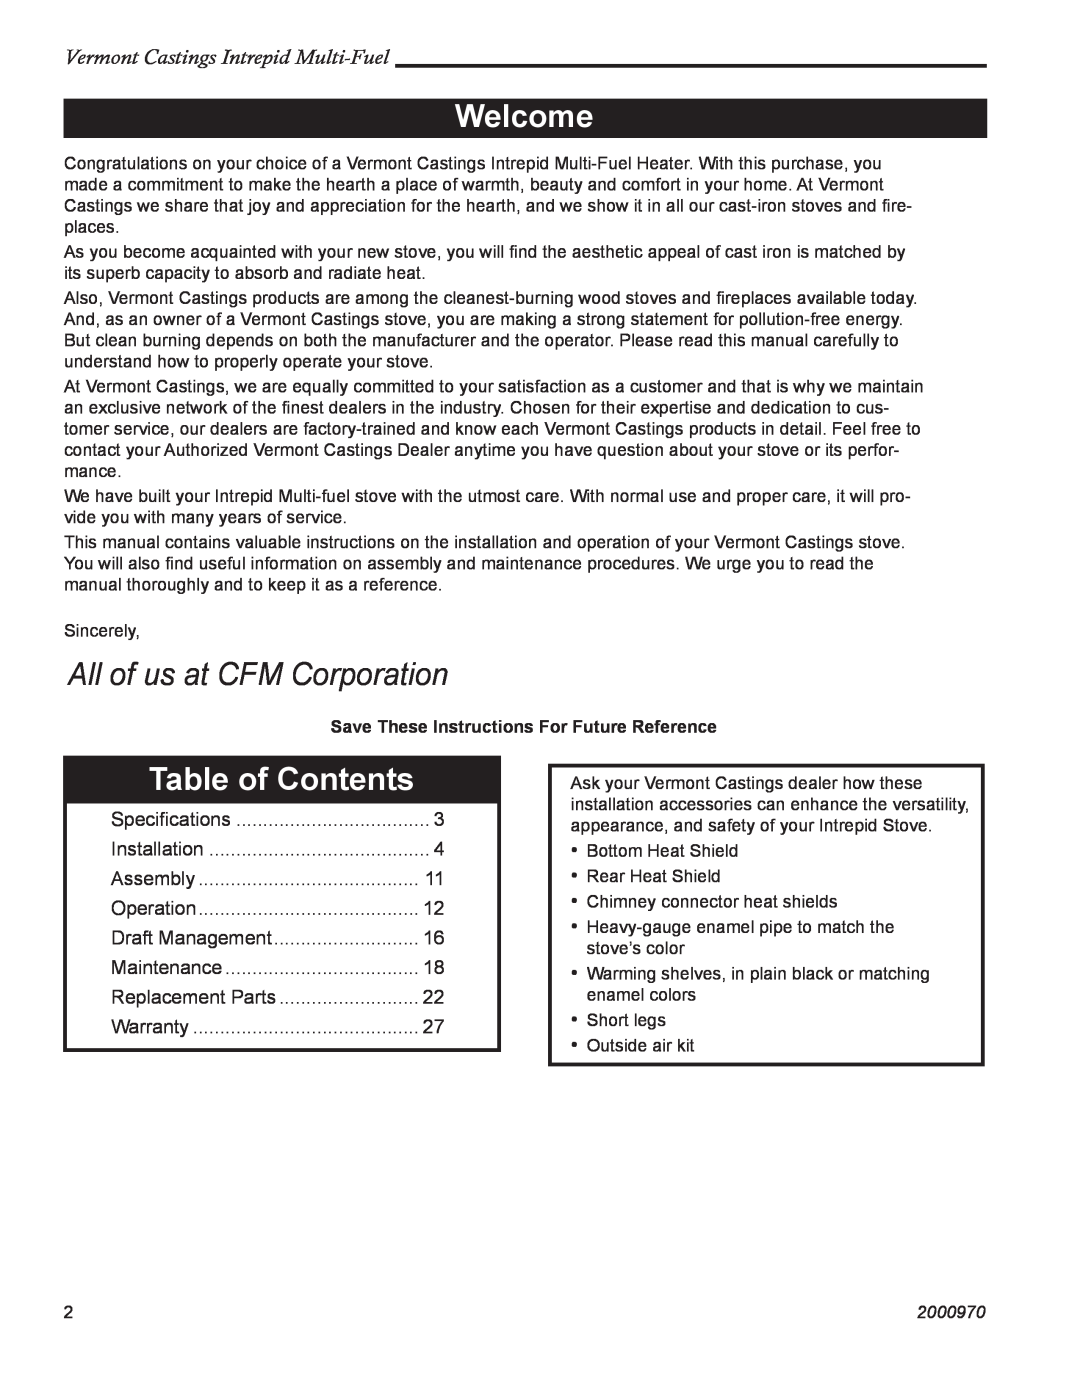 Vermont Casting 1695CE Welcome, Table of Contents, Vermont Castings Intrepid Multi-Fuel, All of us at CFM Corporation 